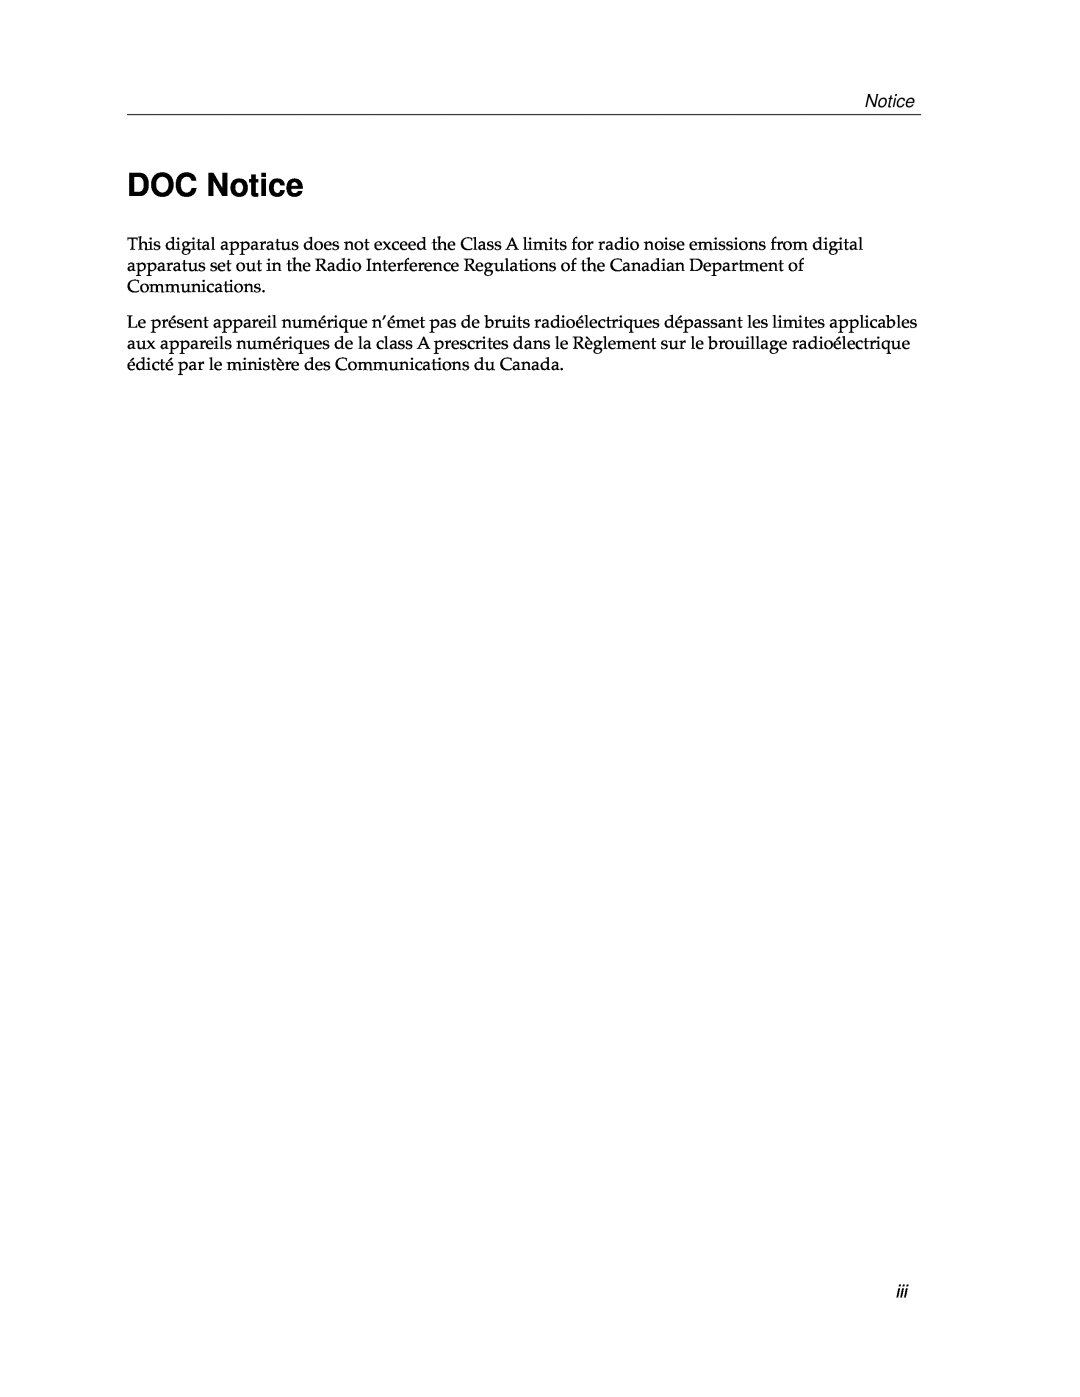 Cabletron Systems 9W111-08 manual DOC Notice 